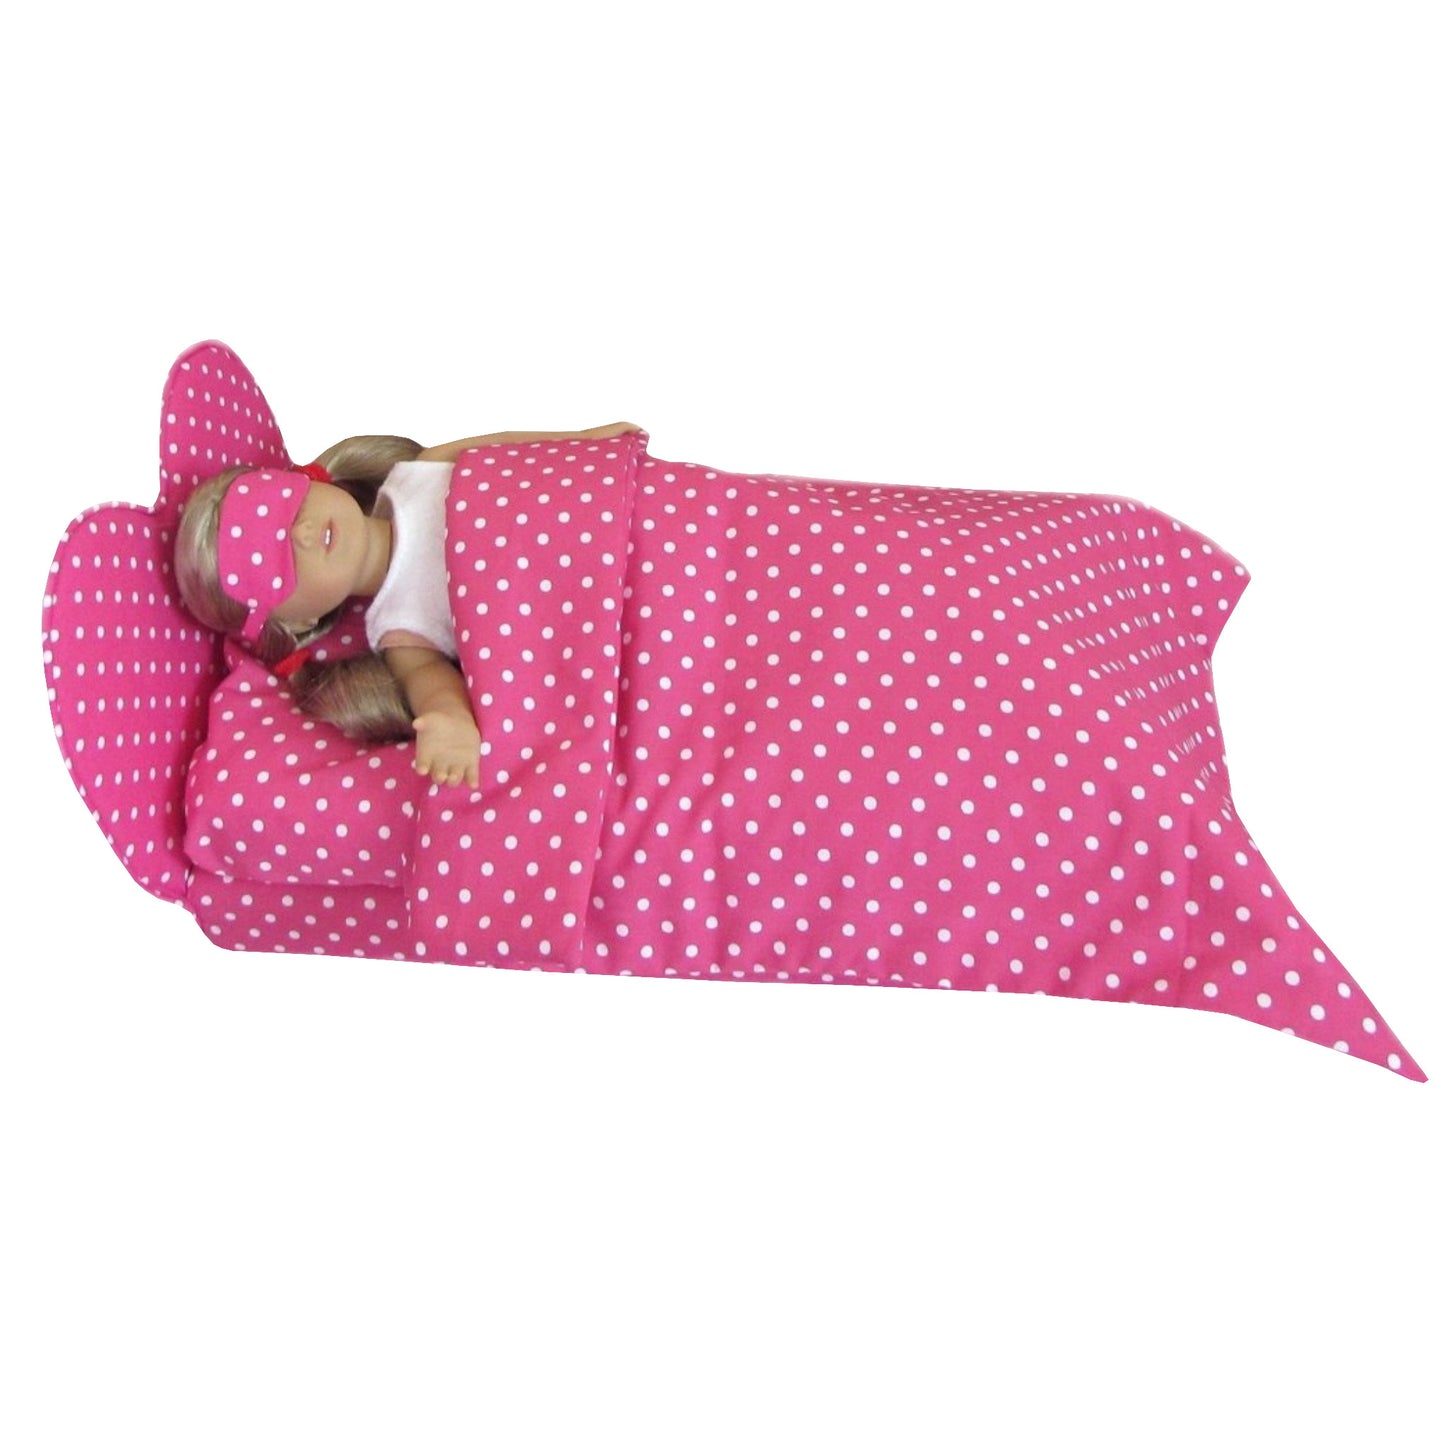 Dots Pink Heart Doll Bed, Doll, eye mask, and Doll Bedding for 18-inch dolls